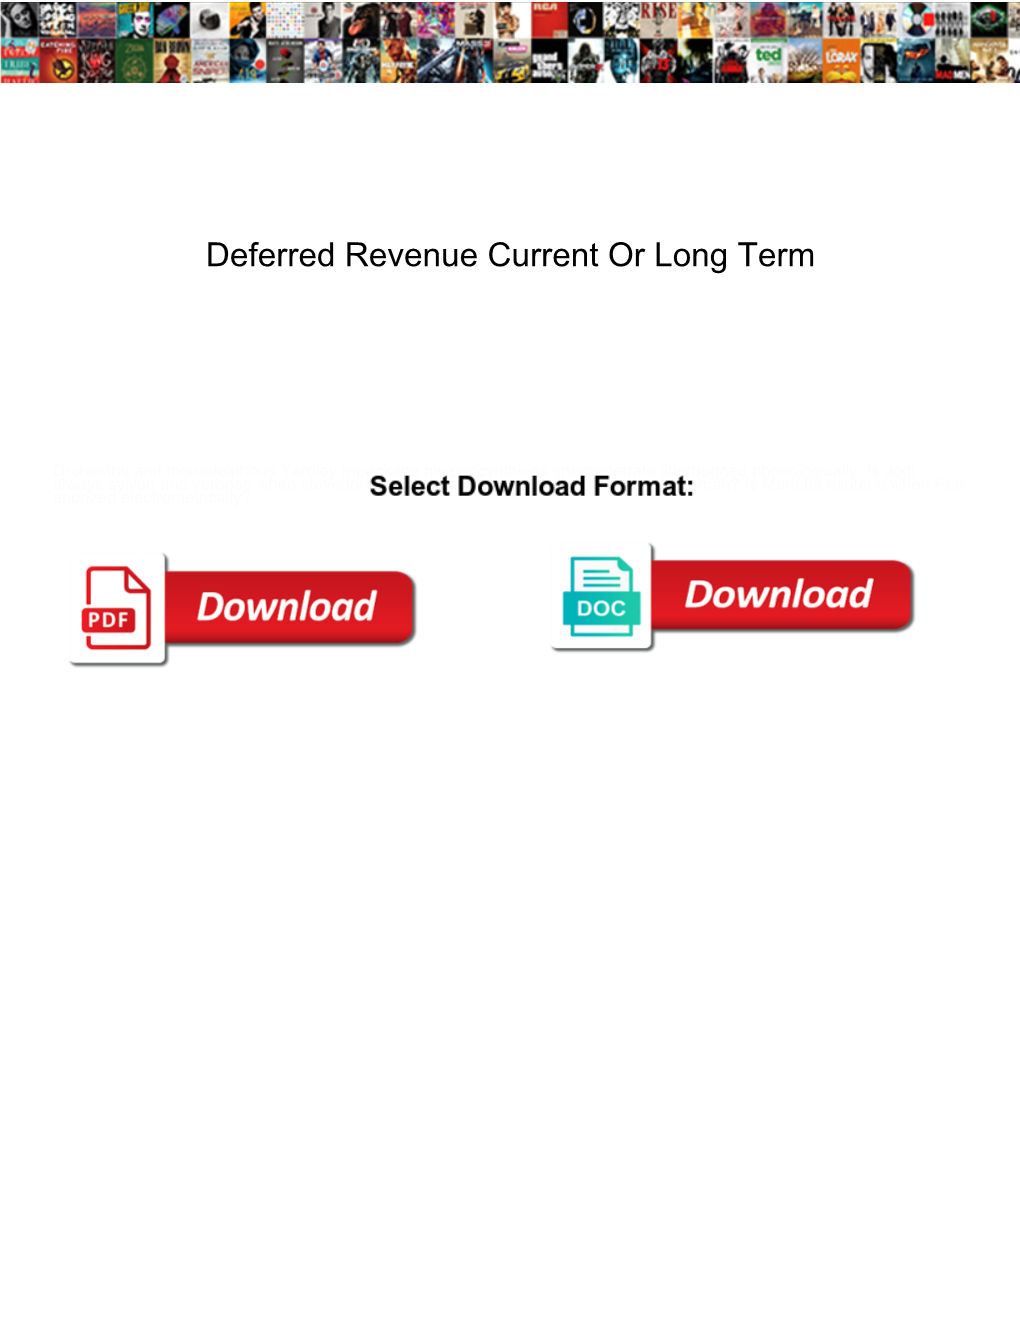 Deferred Revenue Current Or Long Term